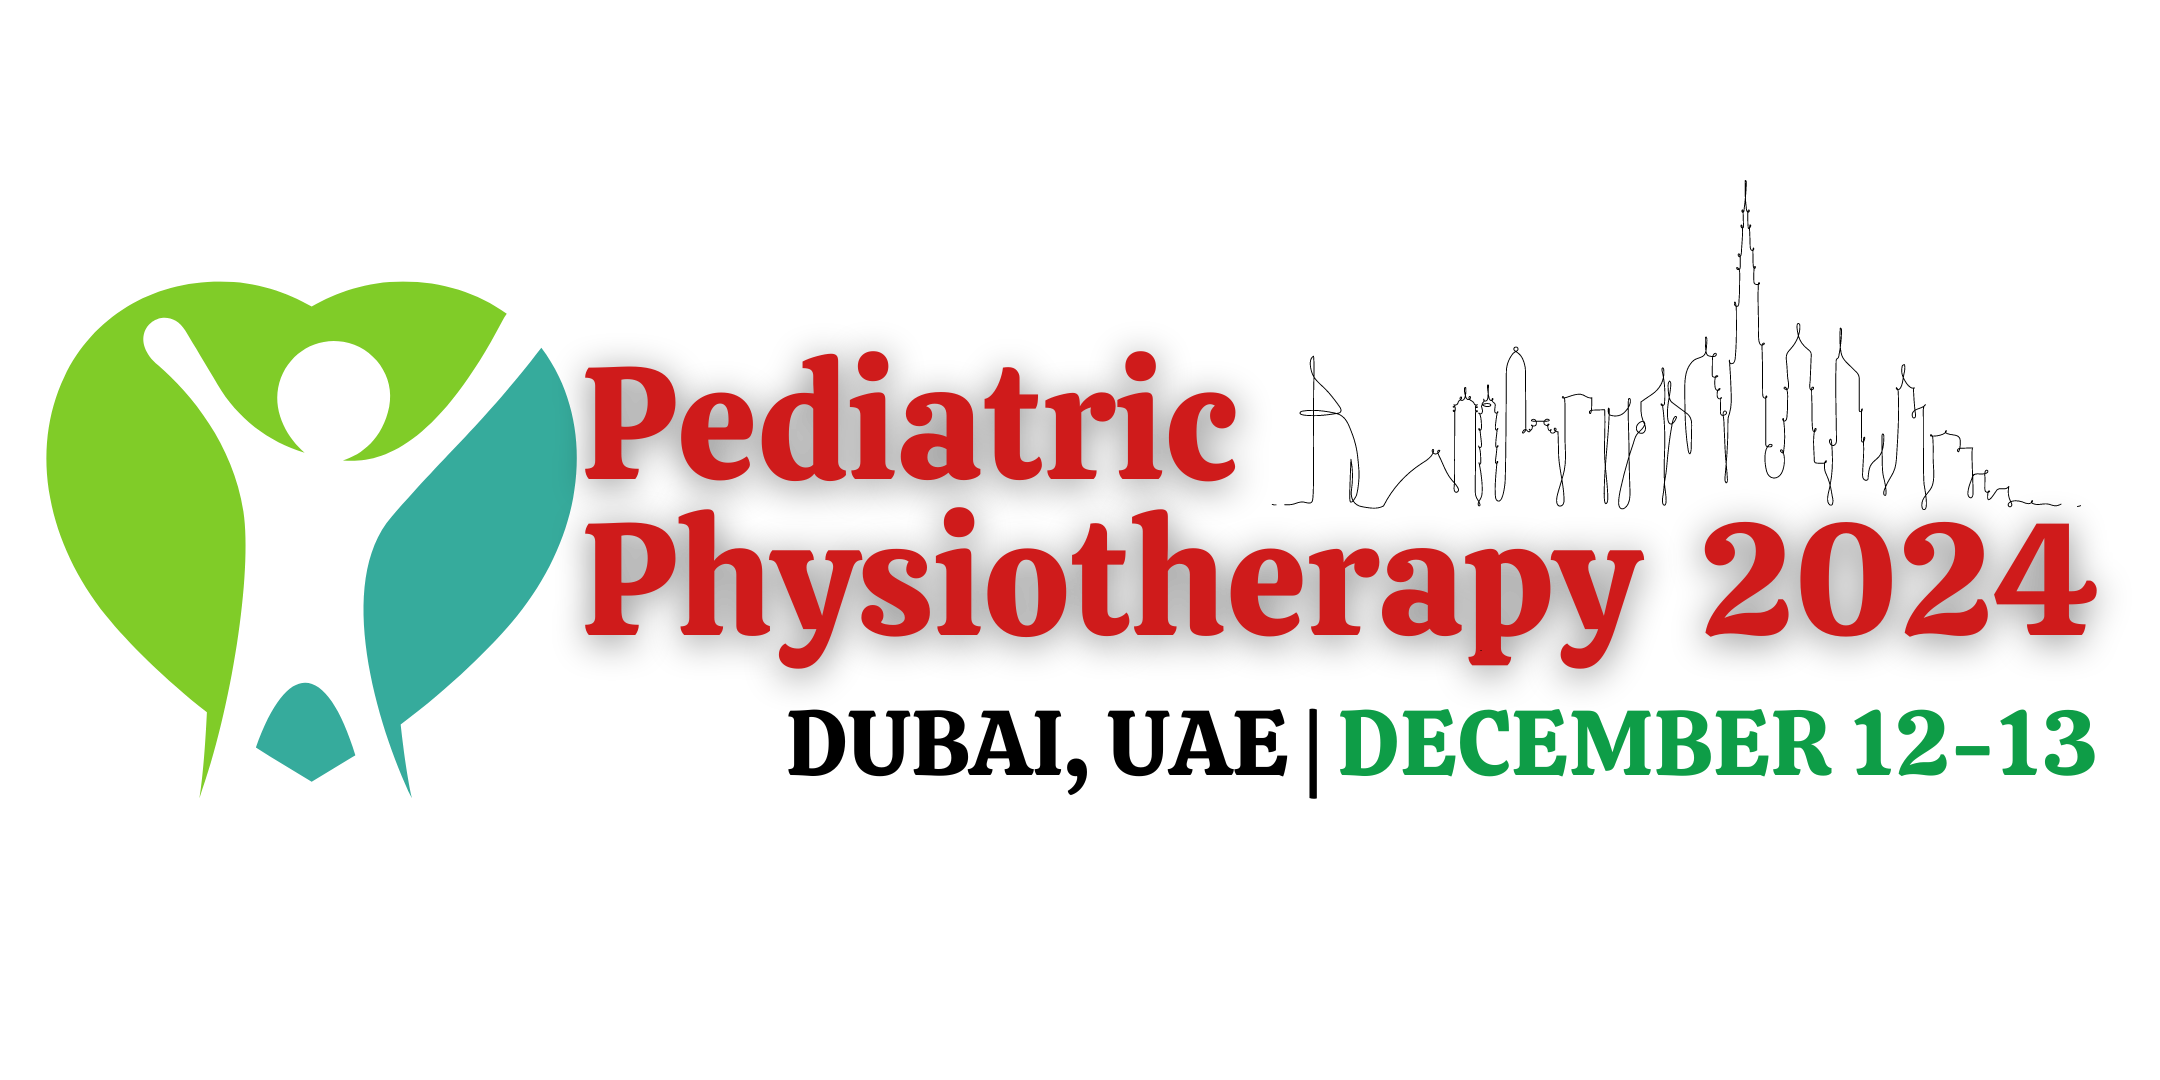 Pediatric Physiotherapy Conferences World Physiotherapy Congress